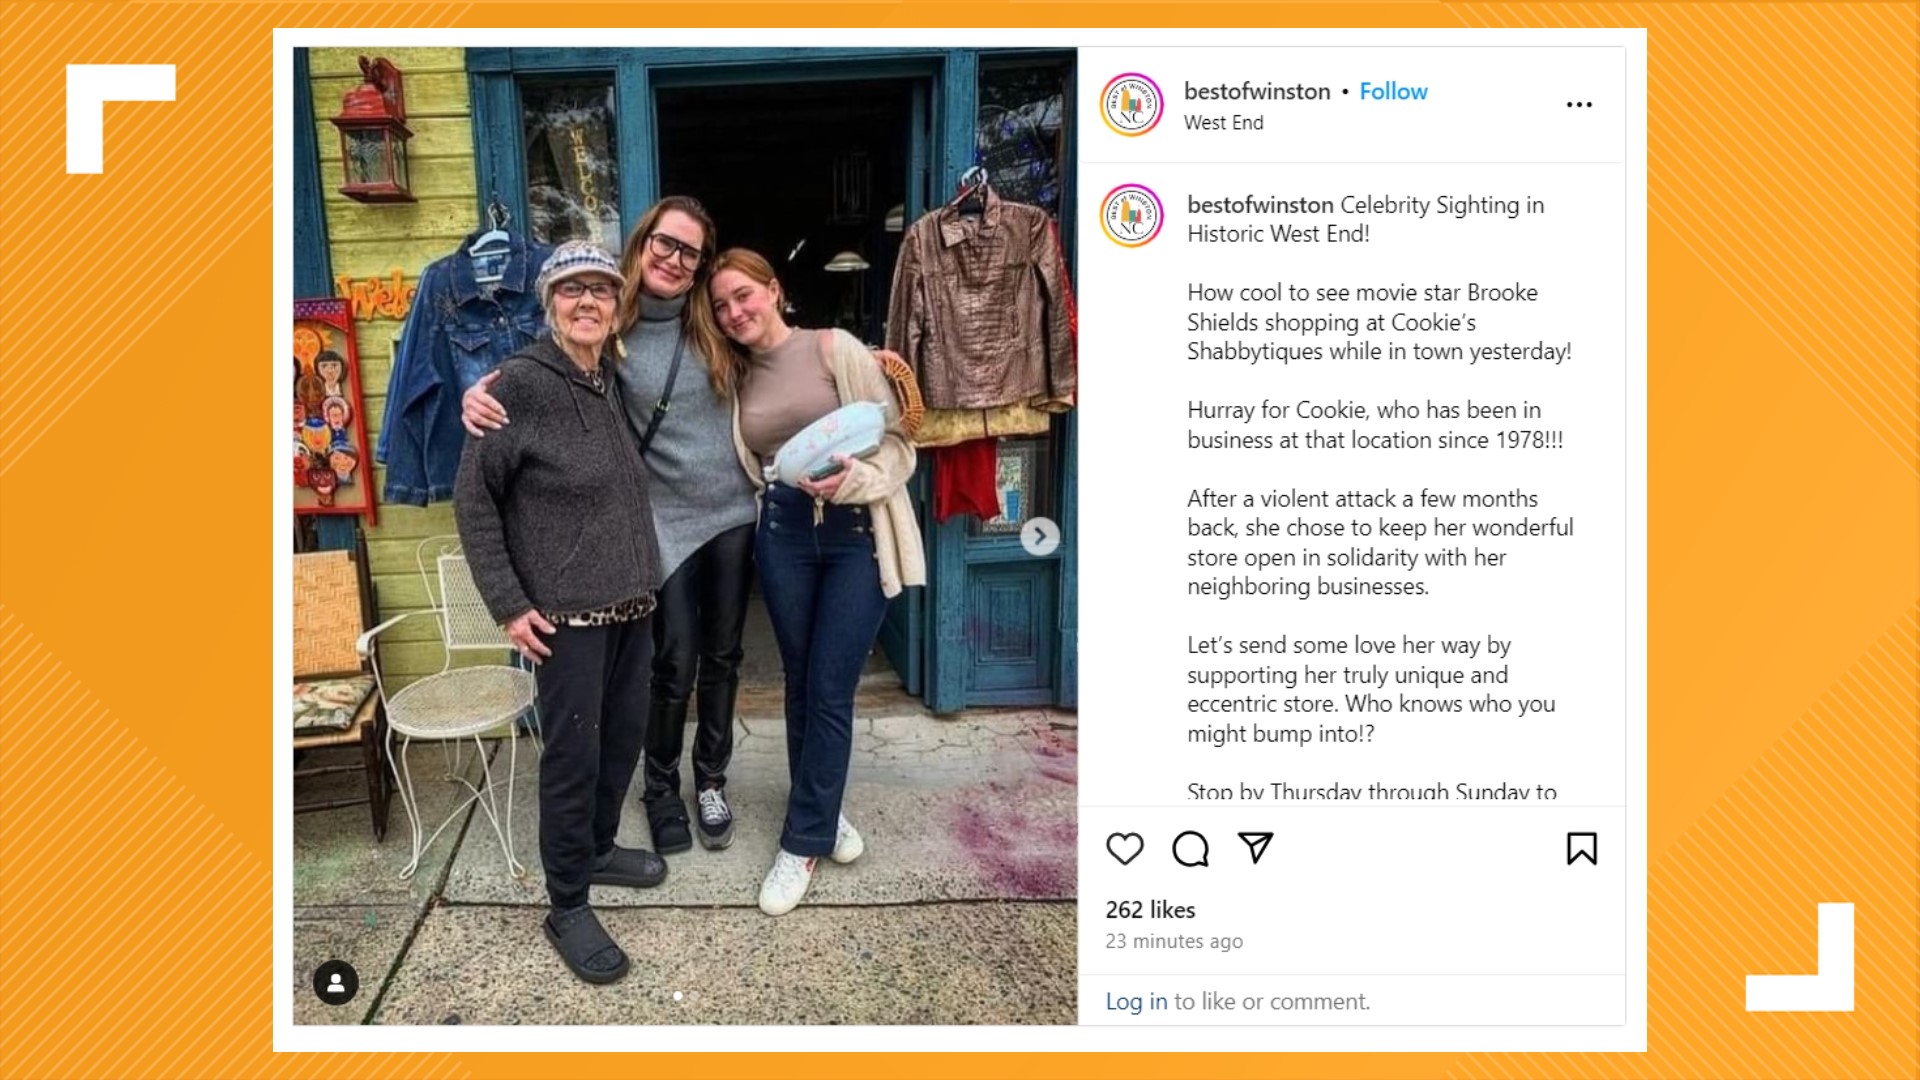 The actress was seen shopping with her daughter in the historic West End of Winston-Salem